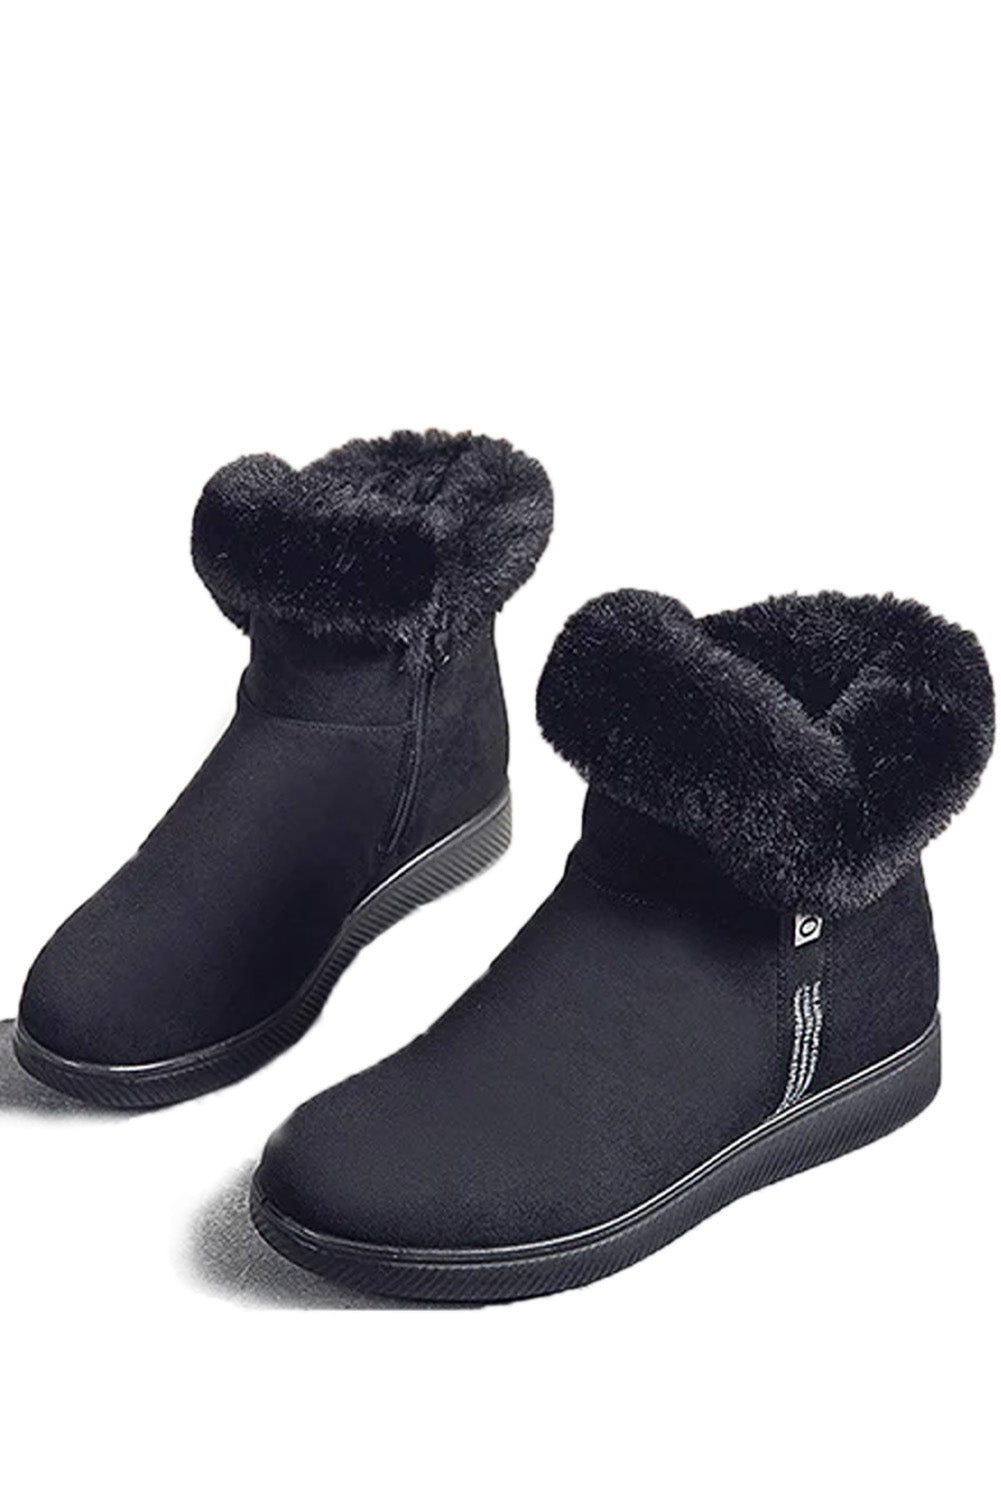 LC12457-2-37, LC12457-2-38, LC12457-2-41, Black Women’s Winter Warm Plush Boots Fur Lined Short Boot for Outdoor